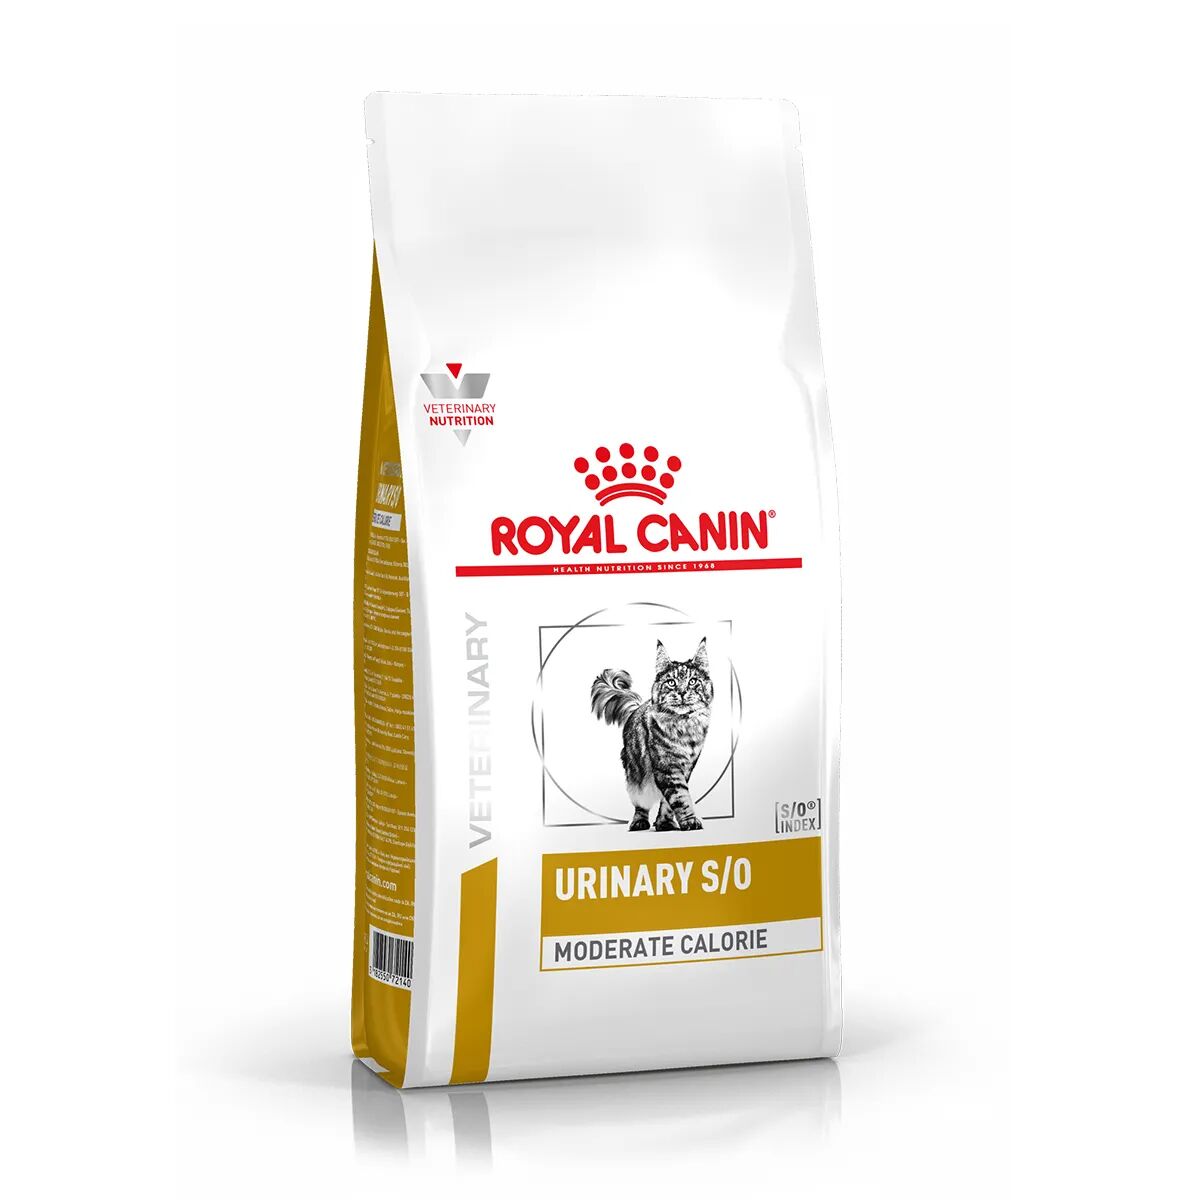 ROYAL CANIN V-Diet Urinary S/O Moderate Calorie 1.5KG